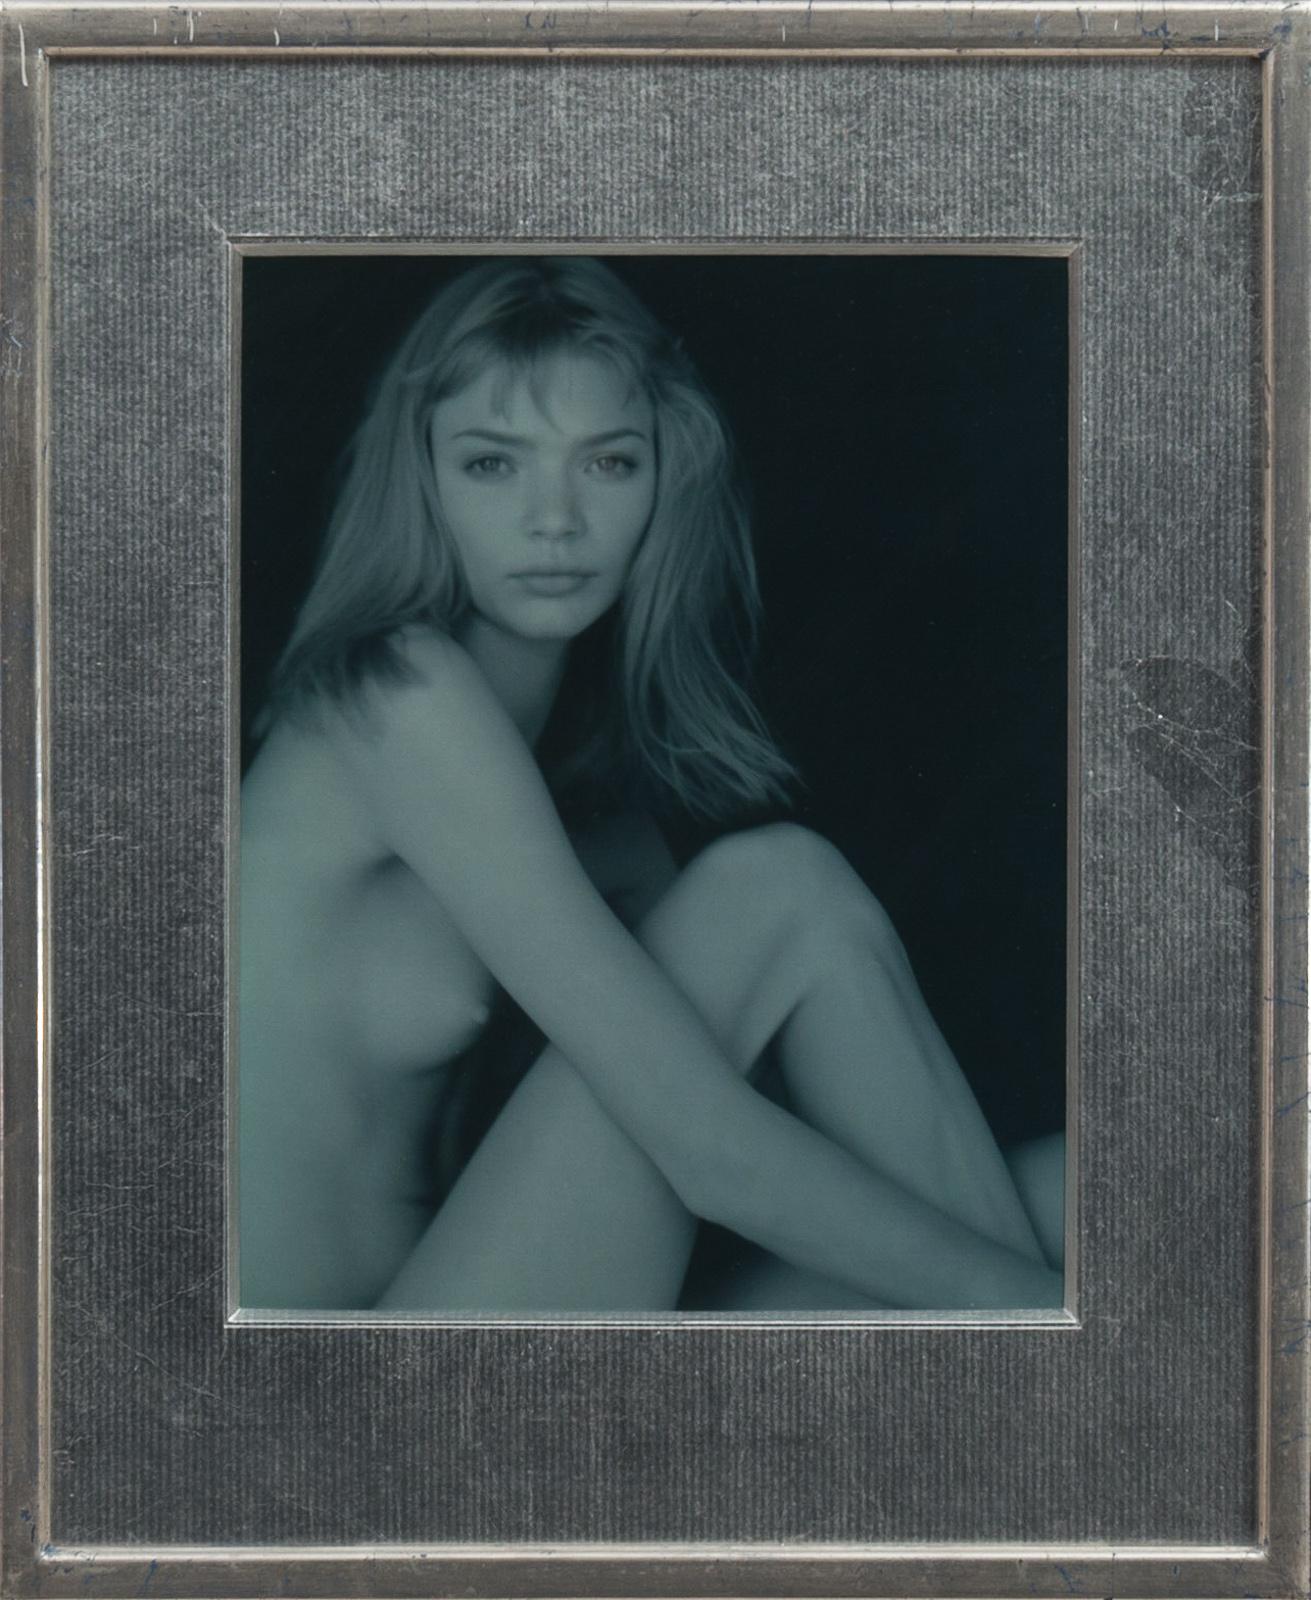 Original silver gelatin print from Lagerfeld's studio
ex-collection Eric Wright - Lagerfeld's right hand man in the 1980s-90s. Framed at Lagerfelds favorite framer, American art on Rue Bonaparte in Paris.
Label and production numbers to the